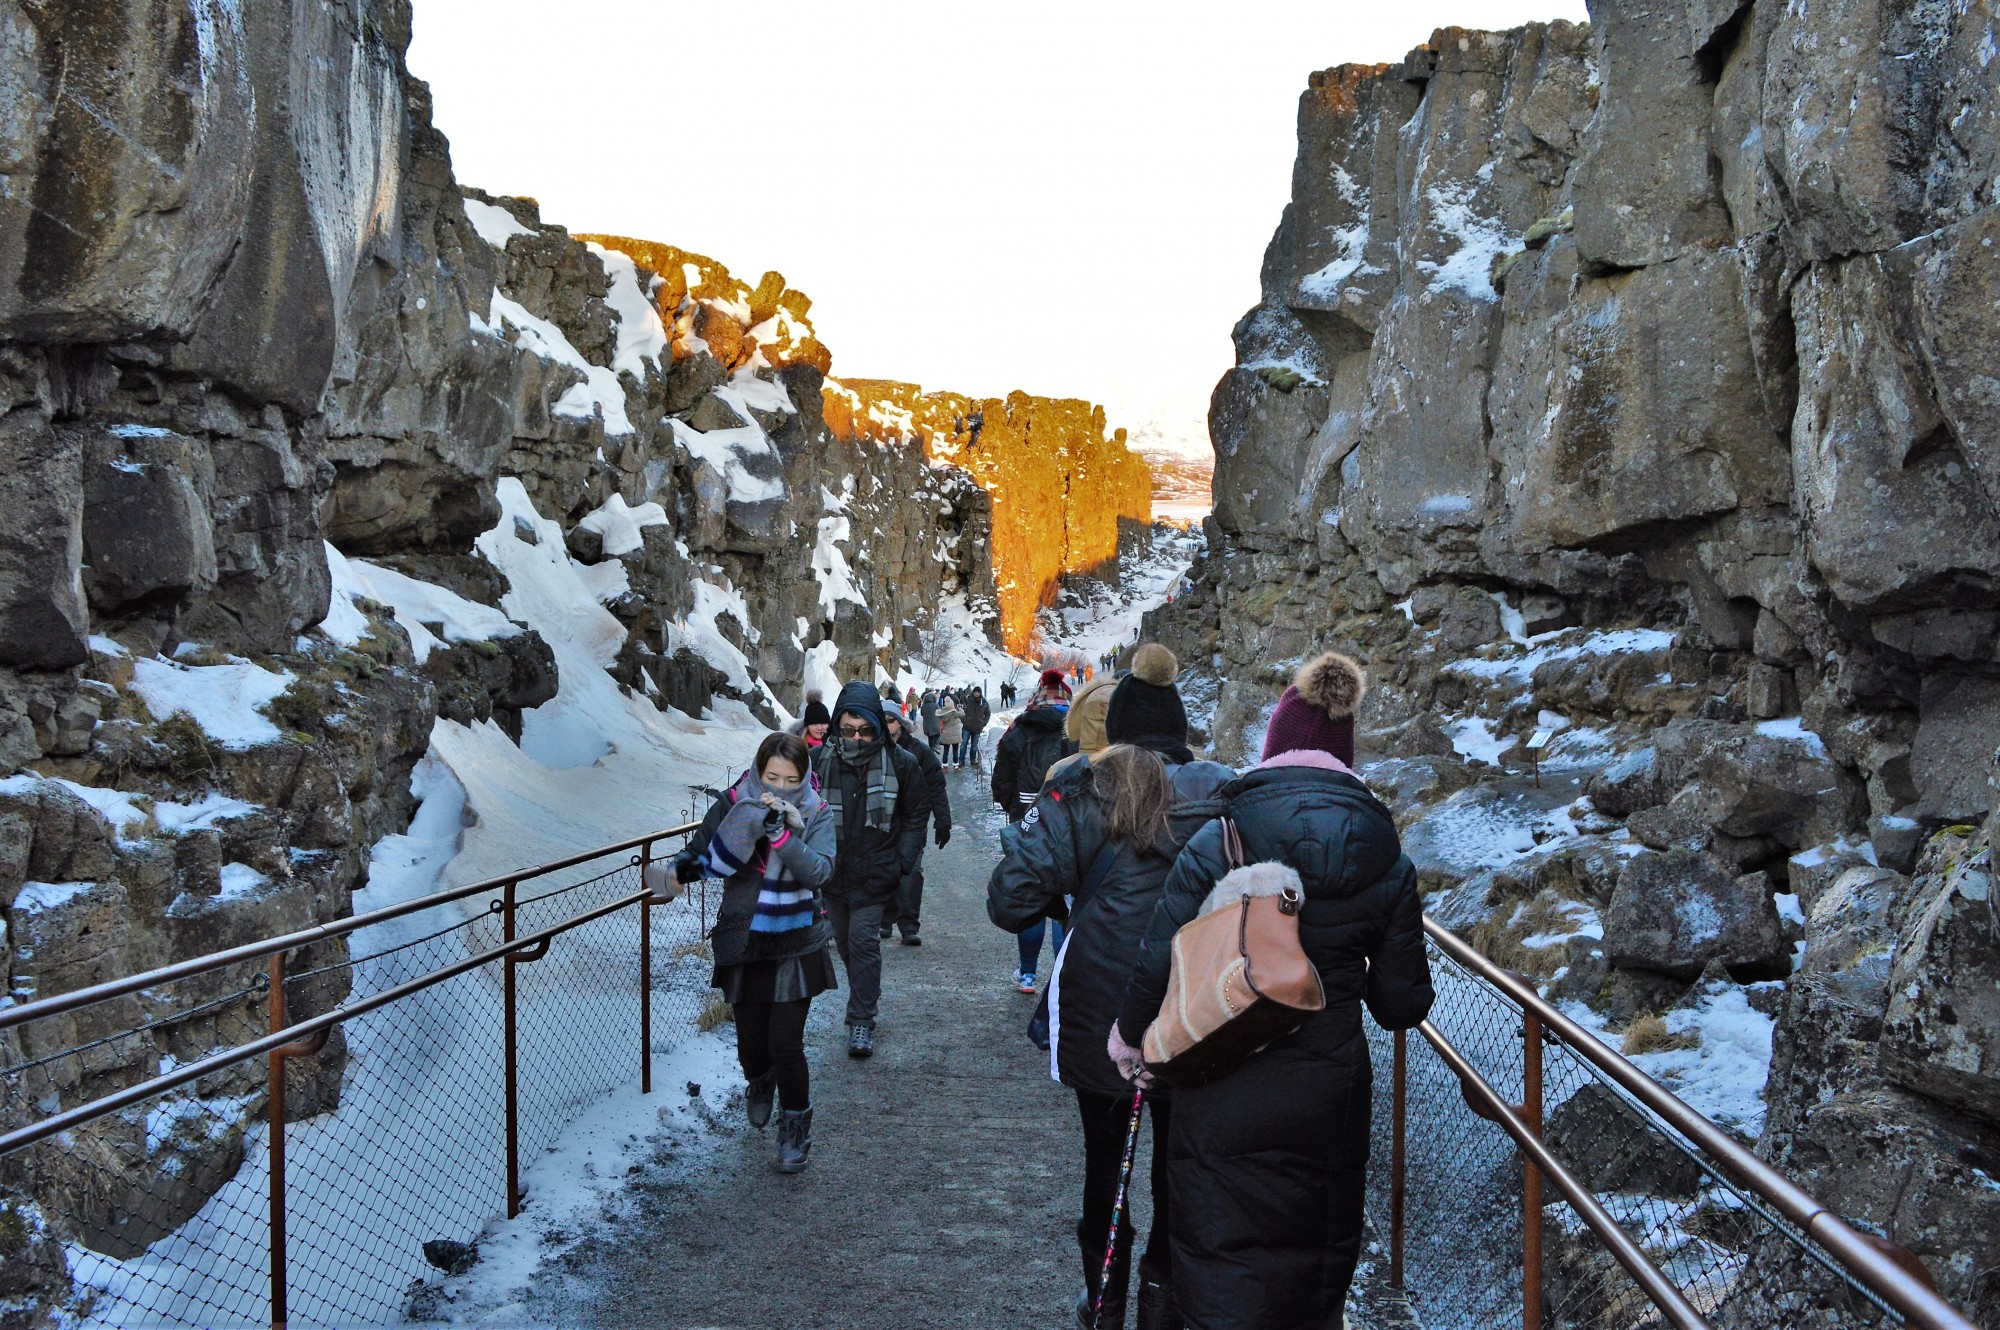 Walking Between The North American And Eurasian Tectonic Plates At Thingvellir In Iceland